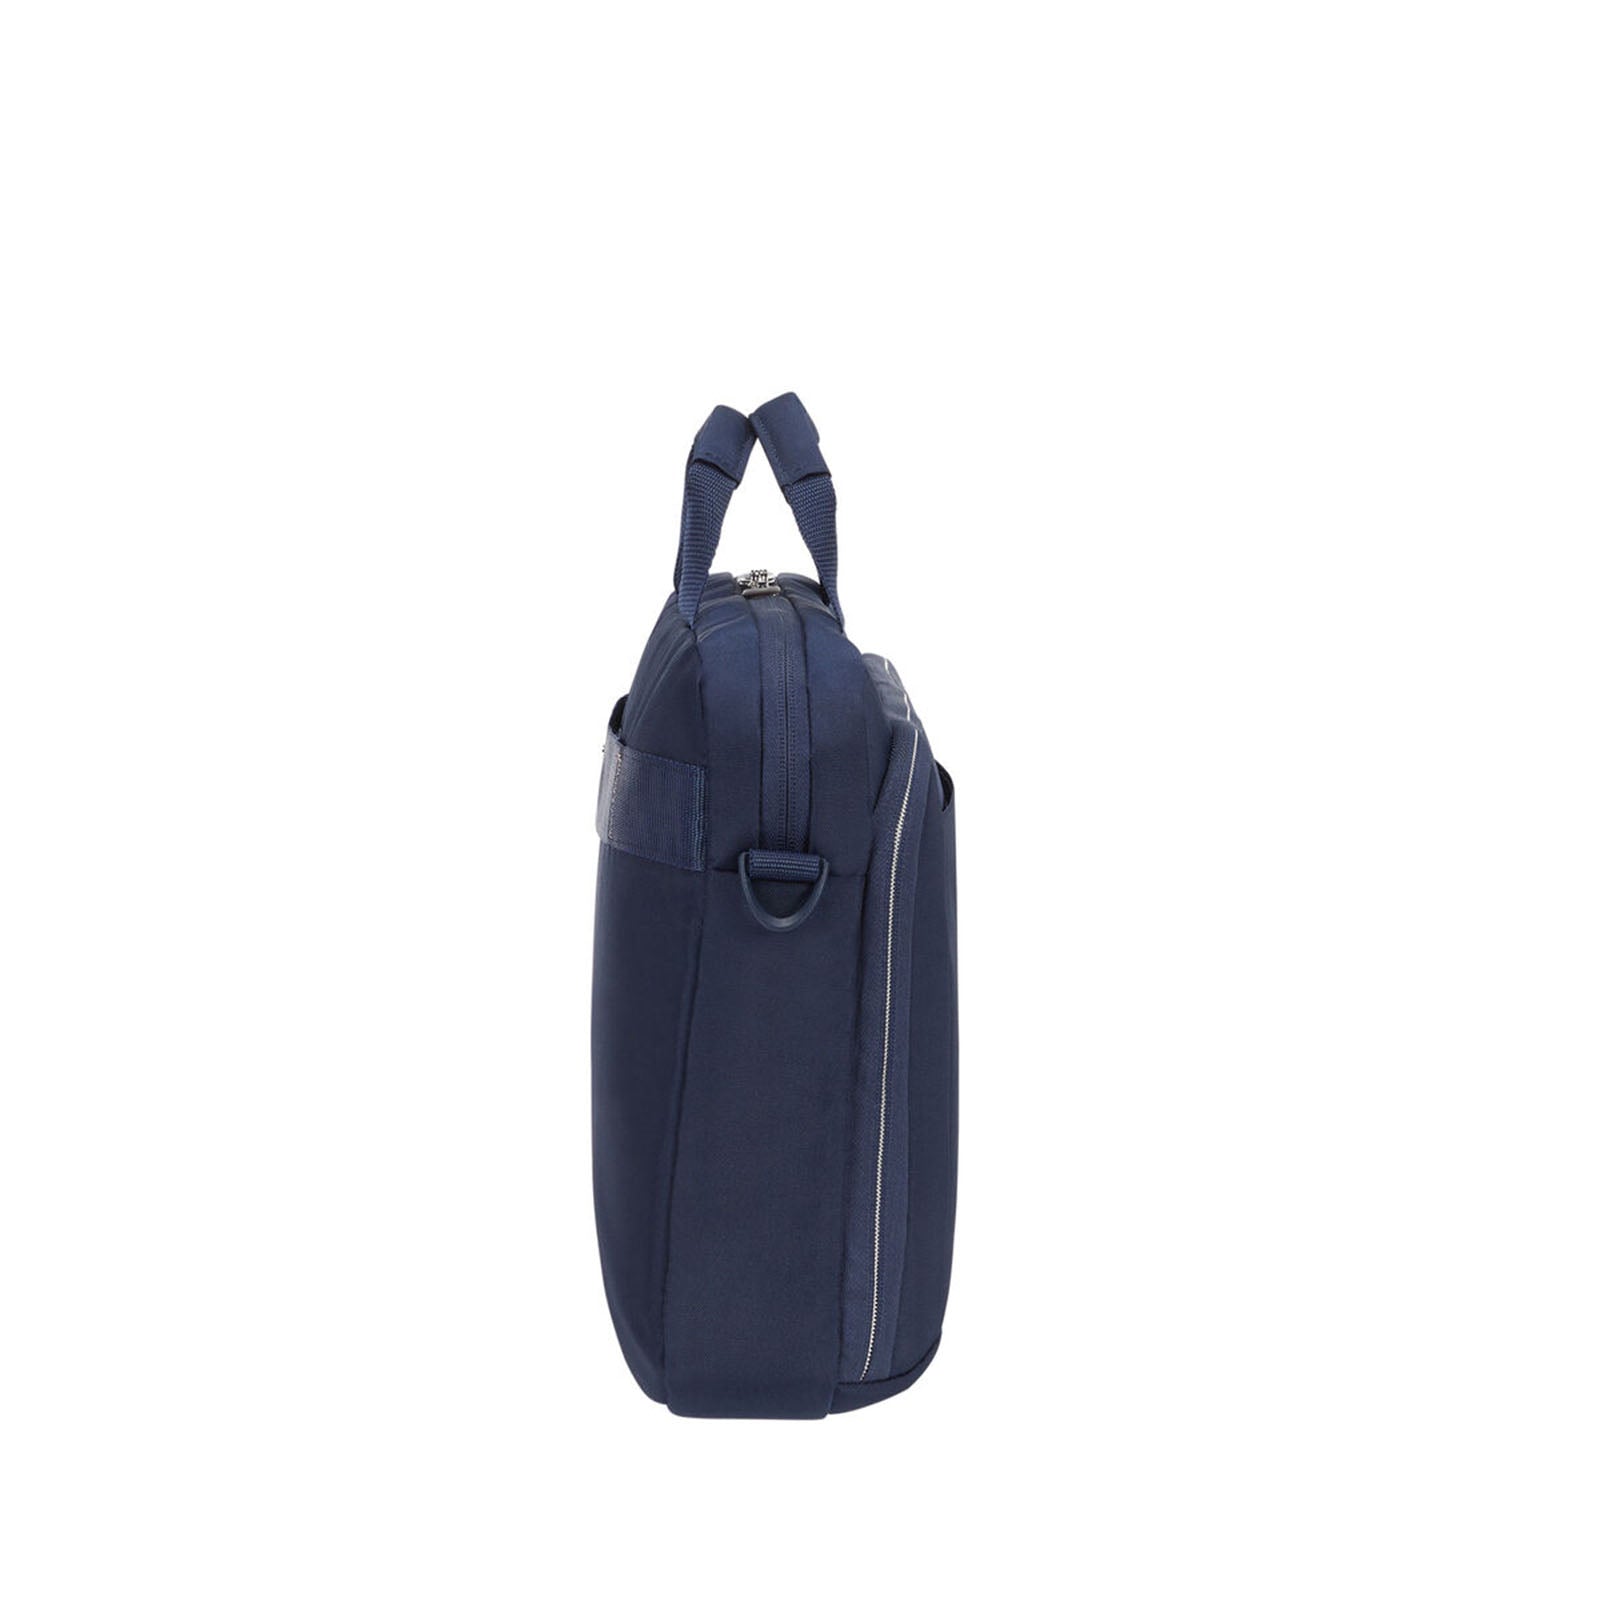 Samsonite-Guardit-Classy-15-Inch-Laptop-Bailhandle-Midnight-Blue-Side